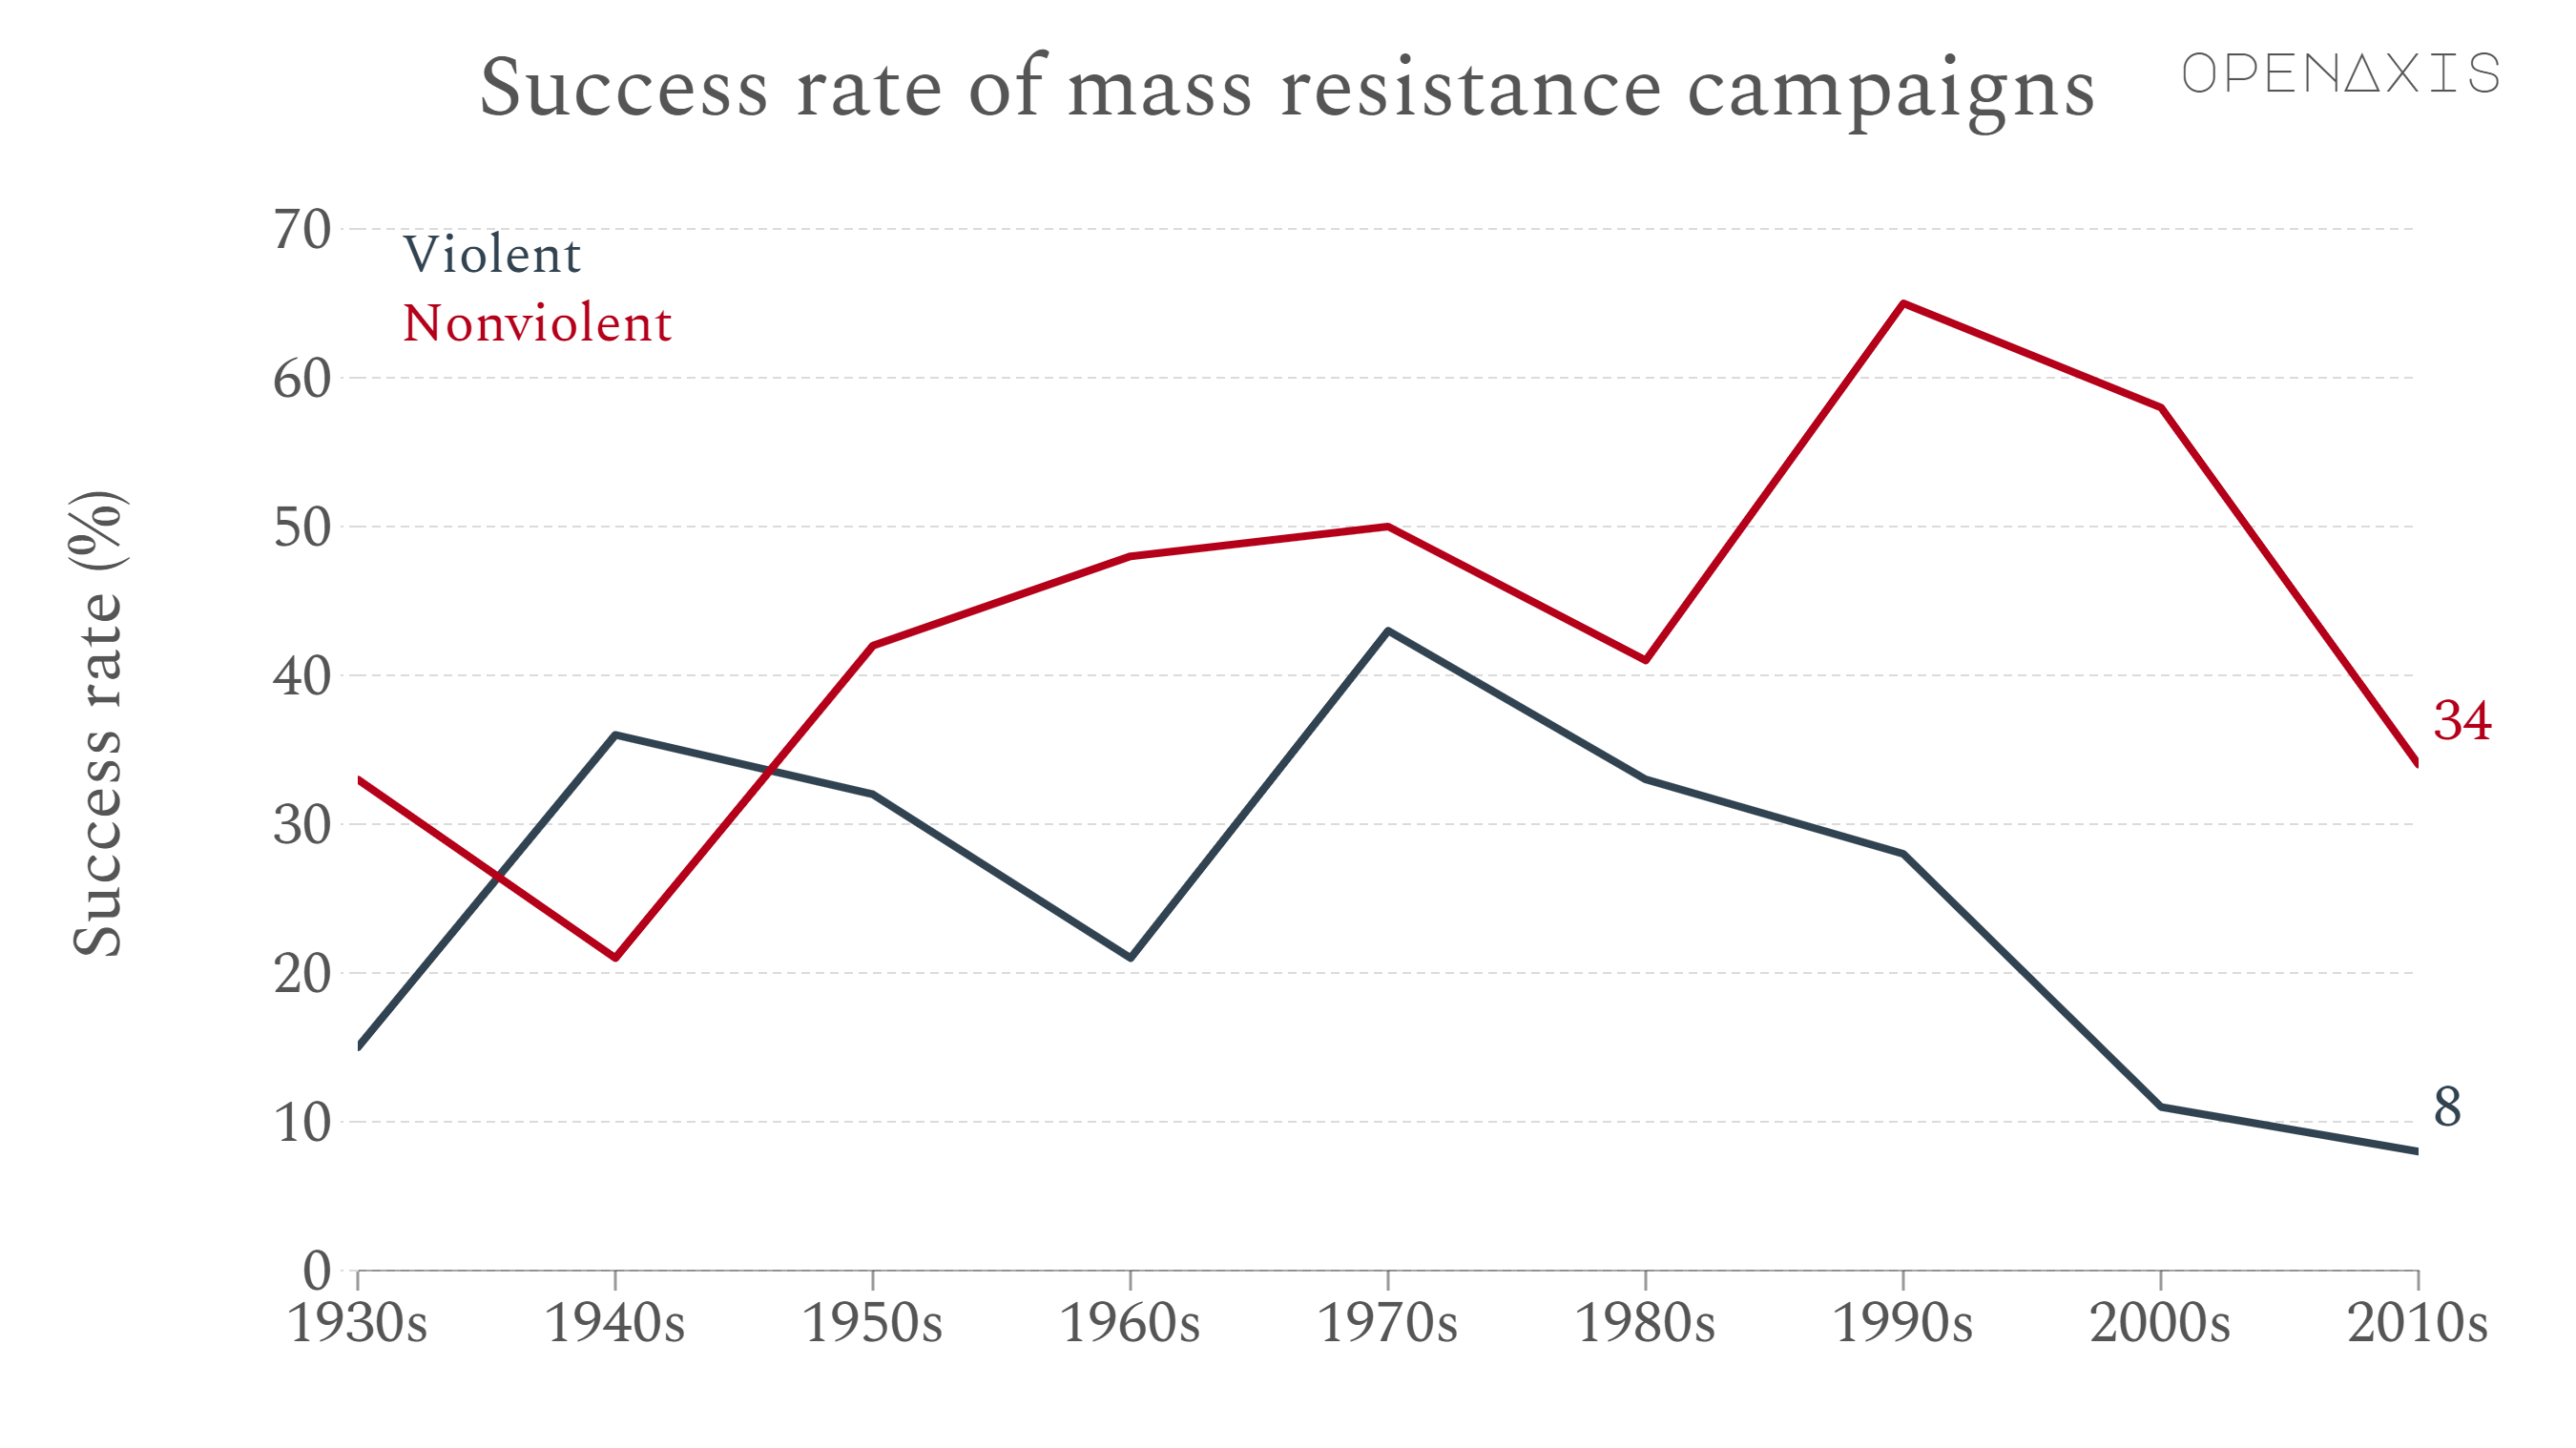 <p>Scholars of civil resistance generally define “success” as the overthrow of a government or territorial independence achieved because of a campaign within a year of its peak.</p><p><br /></p><p>Among the 565 campaigns that have both begun and ended over the past 120 years, about 51 percent of the nonviolent campaigns have succeeded outright, while only about 26 percent of the violent ones have. </p><p><br /></p><p><strong>Nonviolent resistance thus outperforms violence by a 2-to-1 margin</strong>. (Sixteen percent of the nonviolent campaigns and 12 percent of violent ones ended in limited success, while 33 percent of nonviolent campaigns and 61 percent of violent ones ultimately failed.) </p><p><br /></p><p>Moreover, in countries where civil-resistance campaigns took place, chances of democratic consolidation, periods of relative post-conflict stability, and various quality-of-life indicators were higher after the conflict than in the countries that experienced civil war.</p><p><br /></p><p><span data-index="0" data-denotation-char data-id="0" data-value="&lt;a href=&quot;/search?q=%23government&quot; target=_self&gt;#government" data-link="/search?q=%23government">﻿<span contenteditable="false"><span></span><a href="/search?q=%23government" target="_self">#government</a></span>﻿</span> </p><p><br /></p><p>Source: <a href="/data/4059" target="_blank">Civil Resistance: What Everyone Needs to Know by Erica Chenoweth</a></p><p><br /></p>